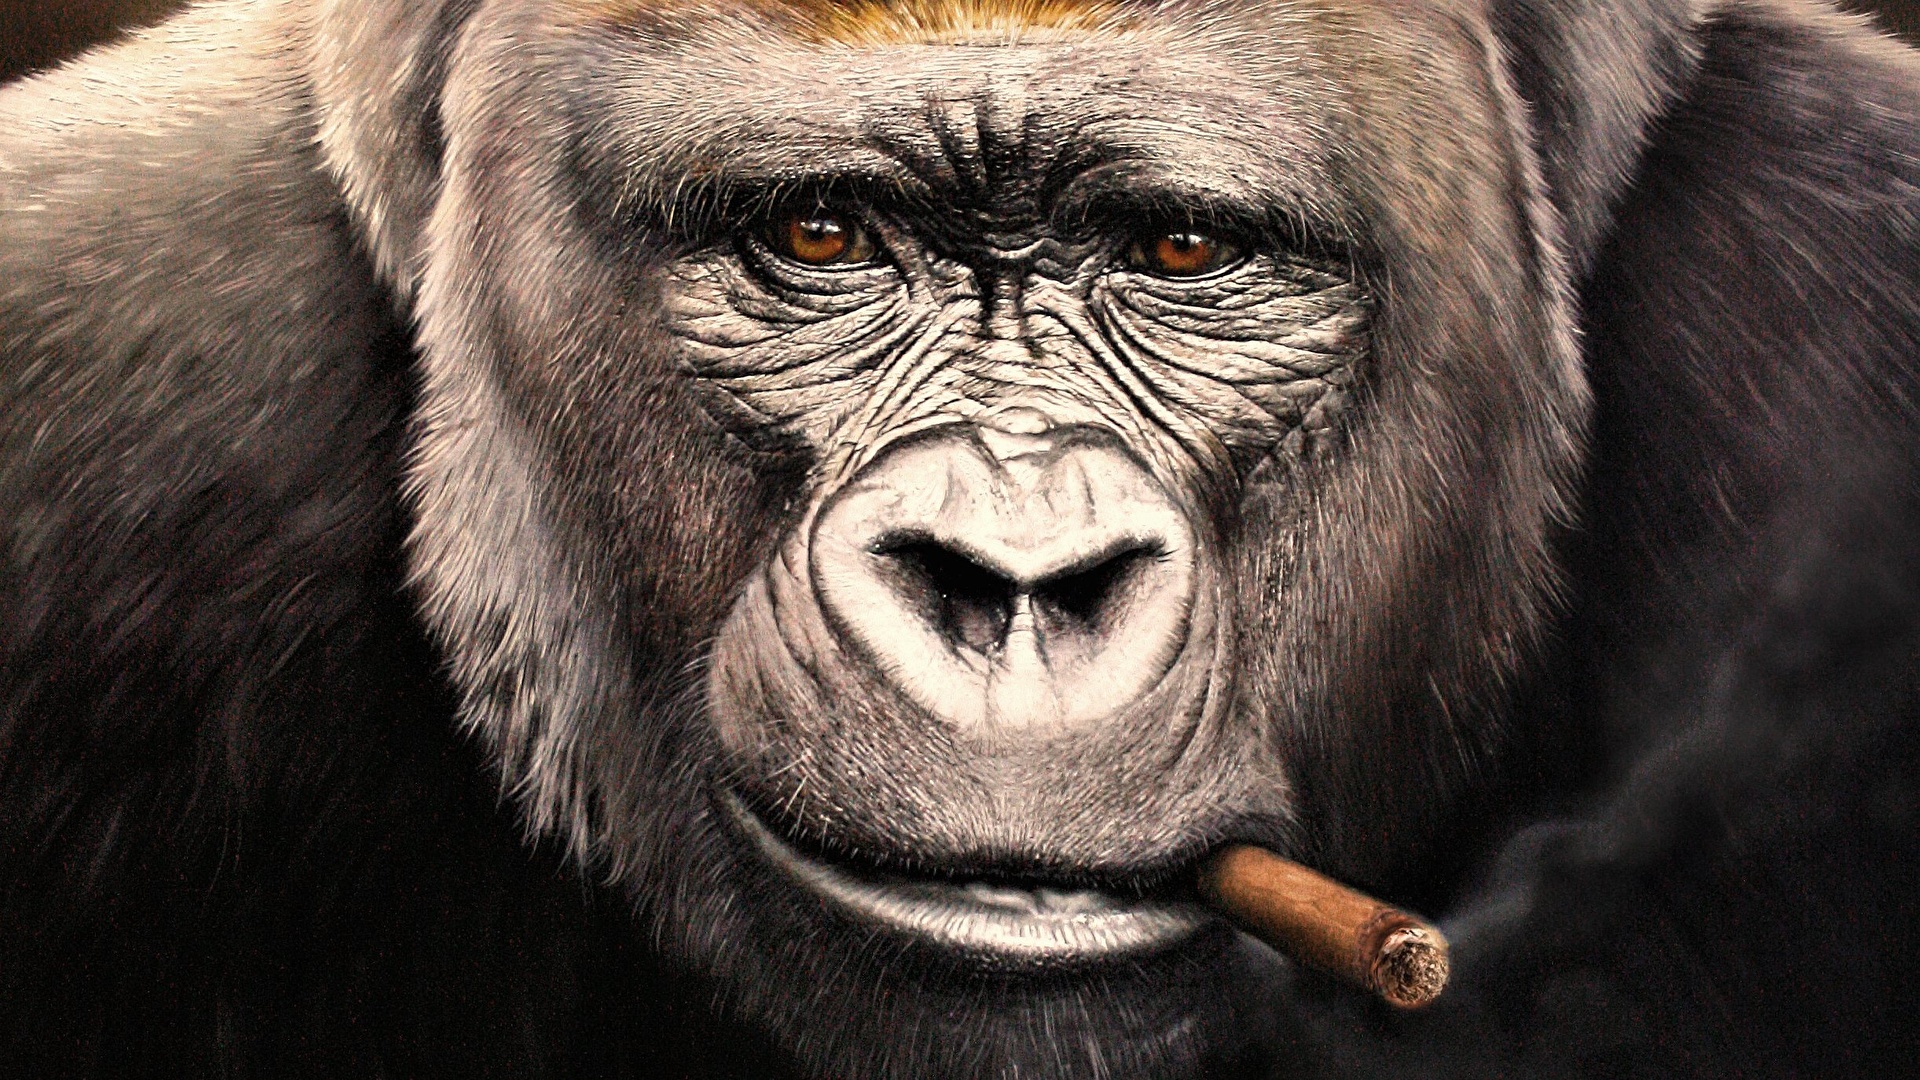 gorilla HD wallpapers backgrounds